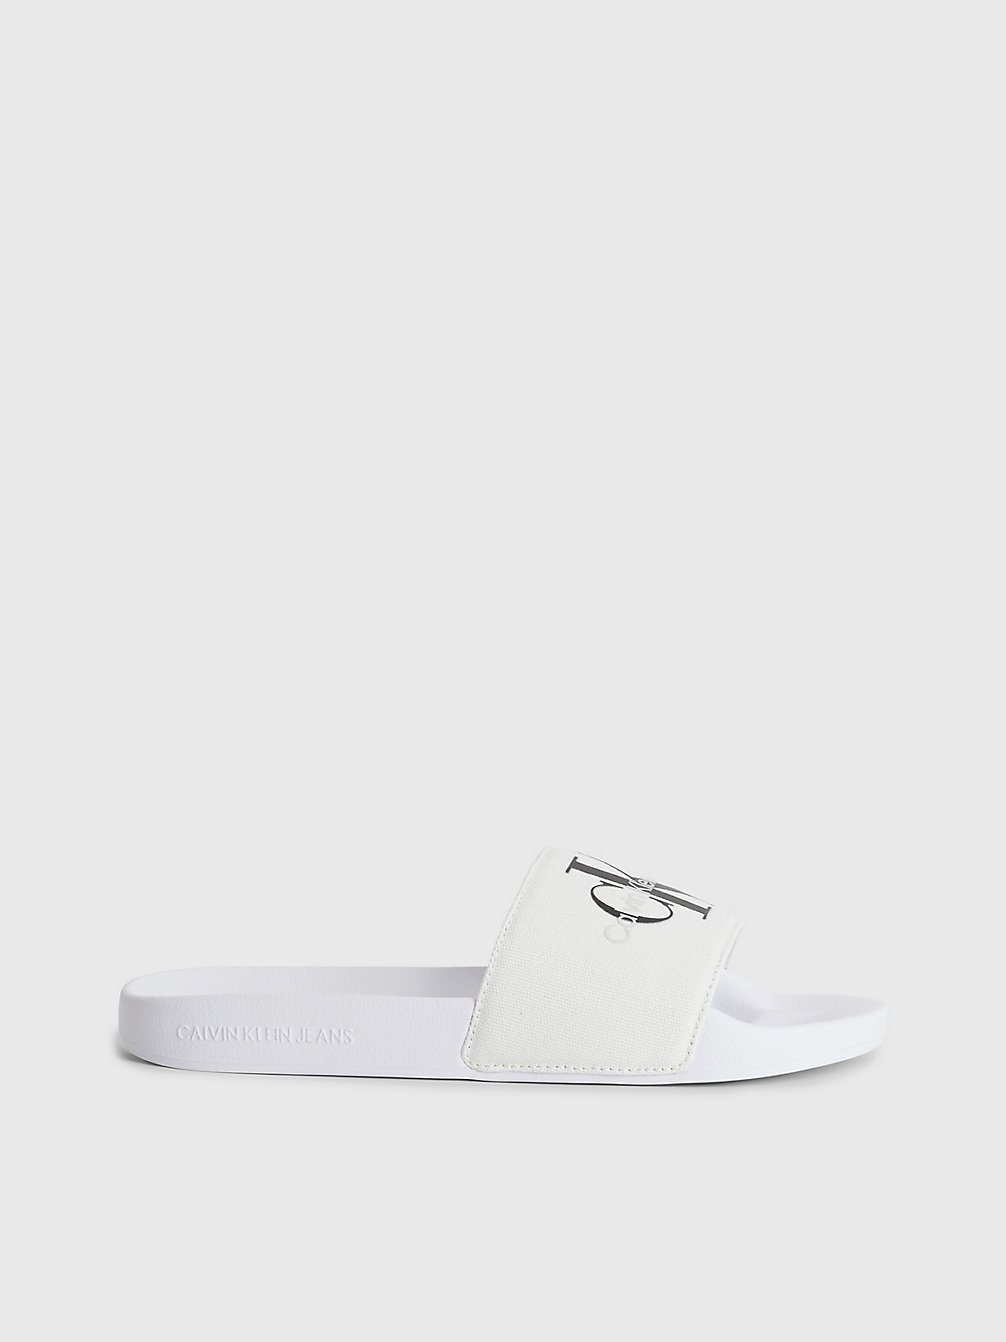 WHITE Recycled Canvas Sliders undefined women Calvin Klein